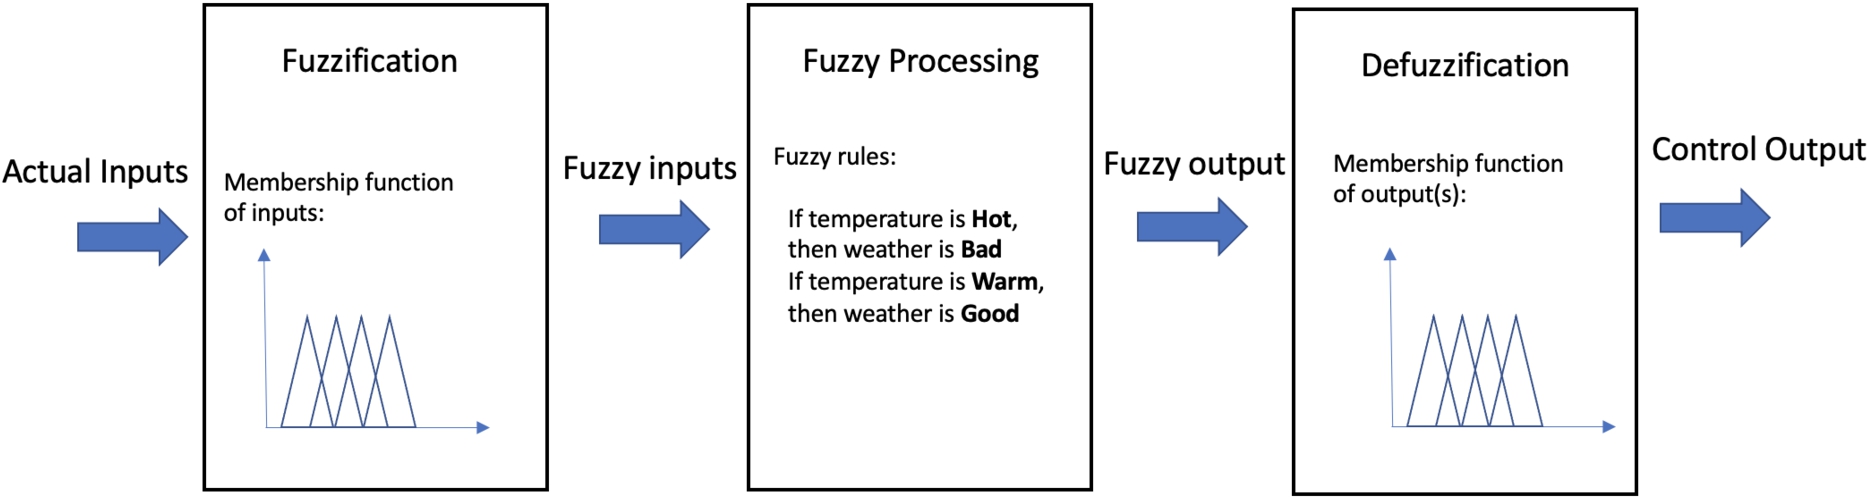 Operation of a fuzzy controller.